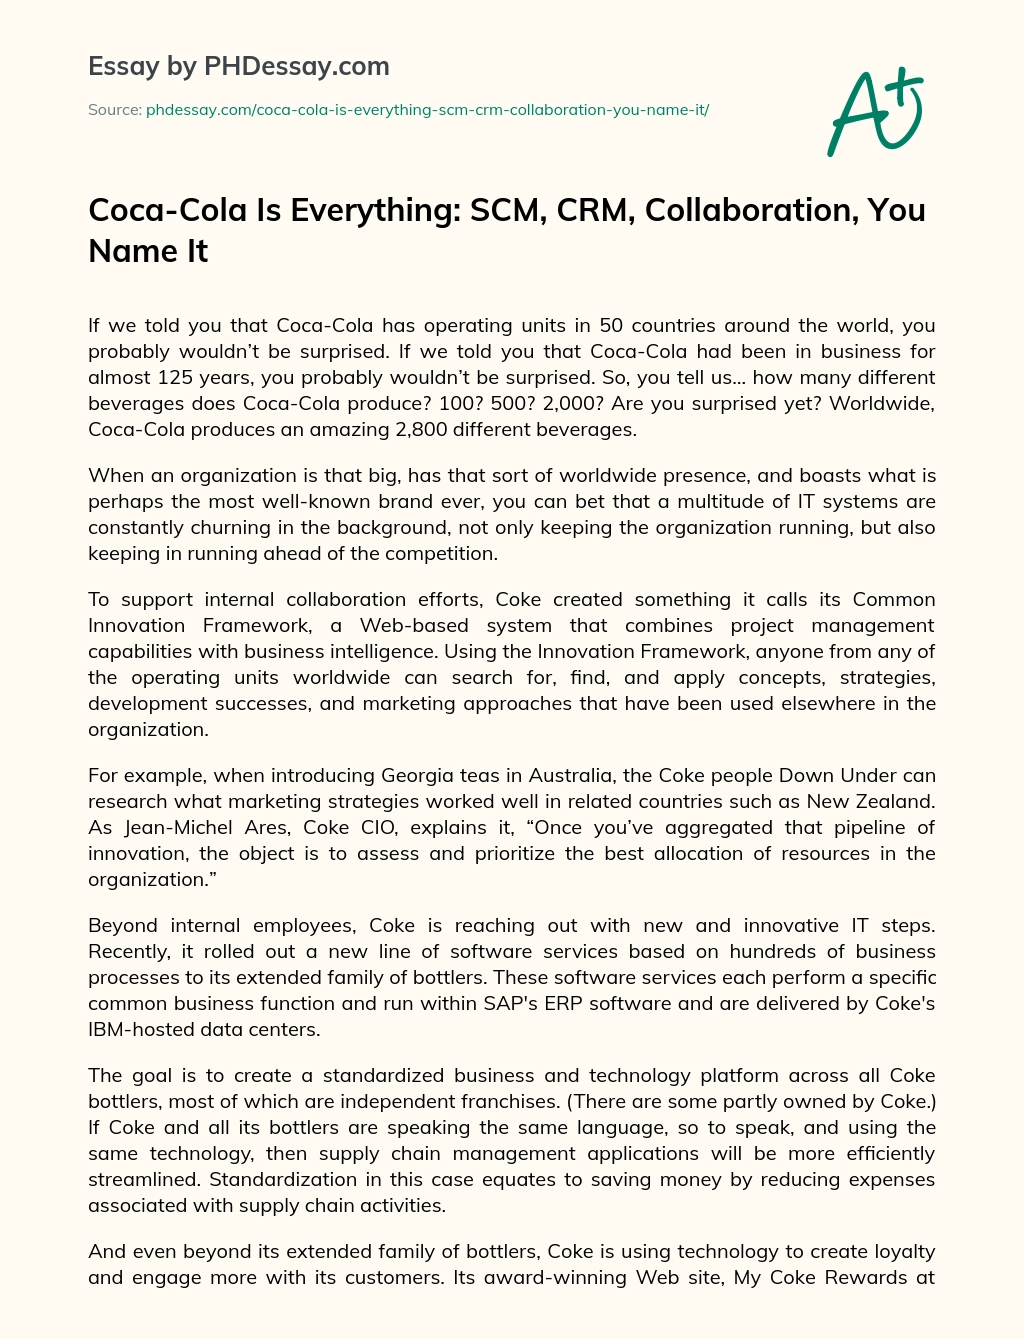 Coca-Cola Is Everything: SCM, CRM, Collaboration, You Name It essay